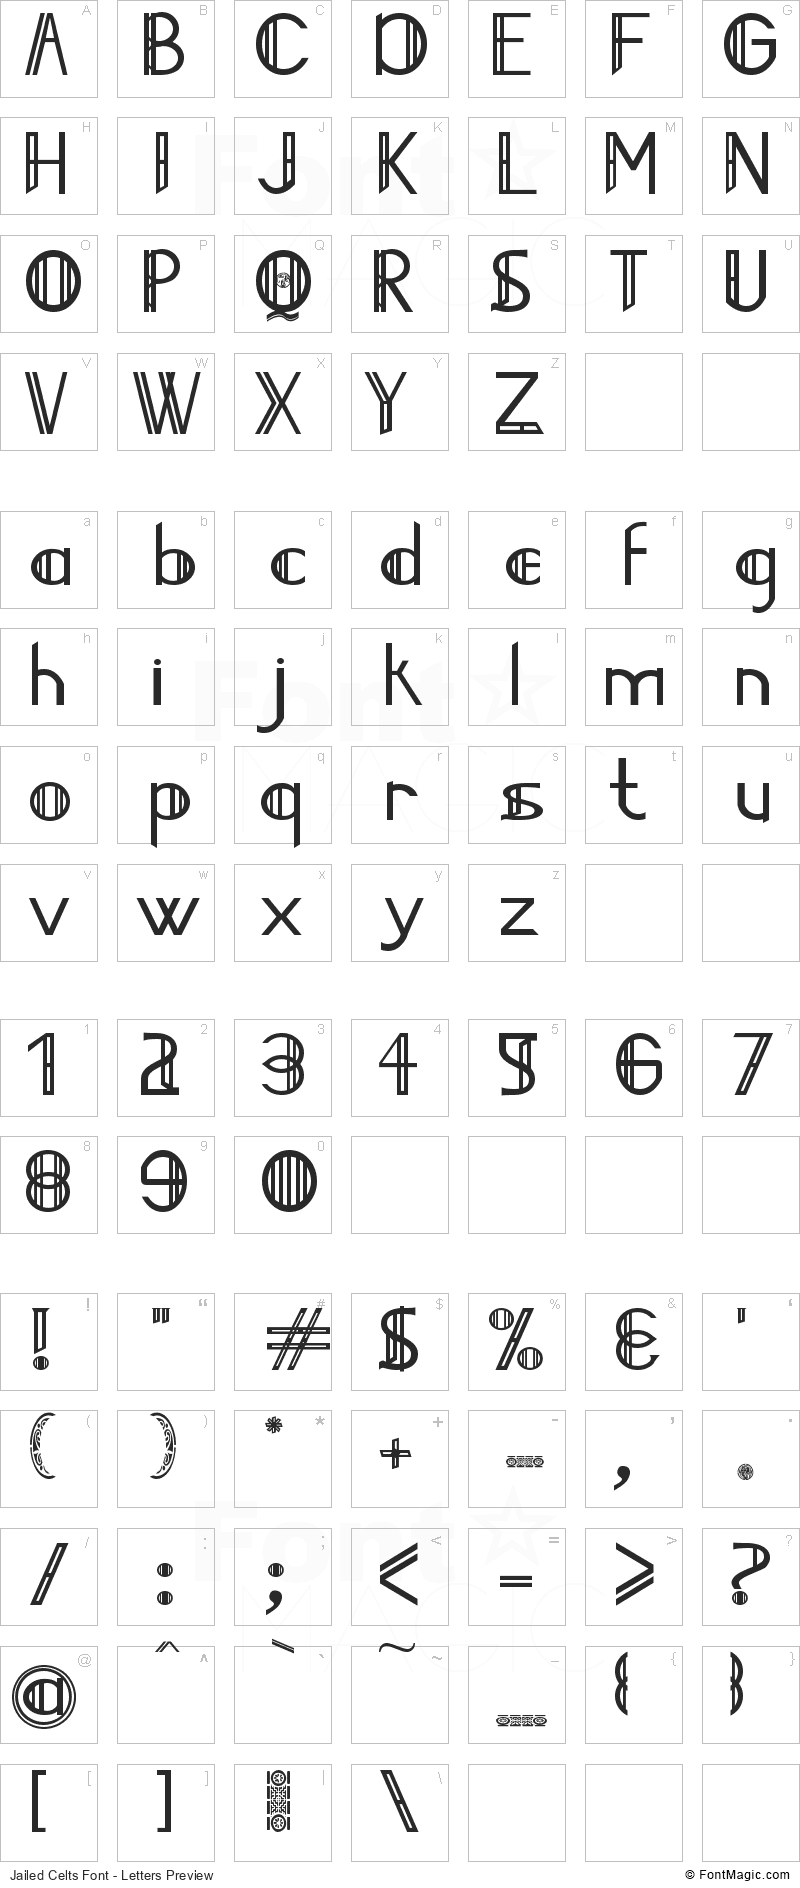 Jailed Celts Font - All Latters Preview Chart